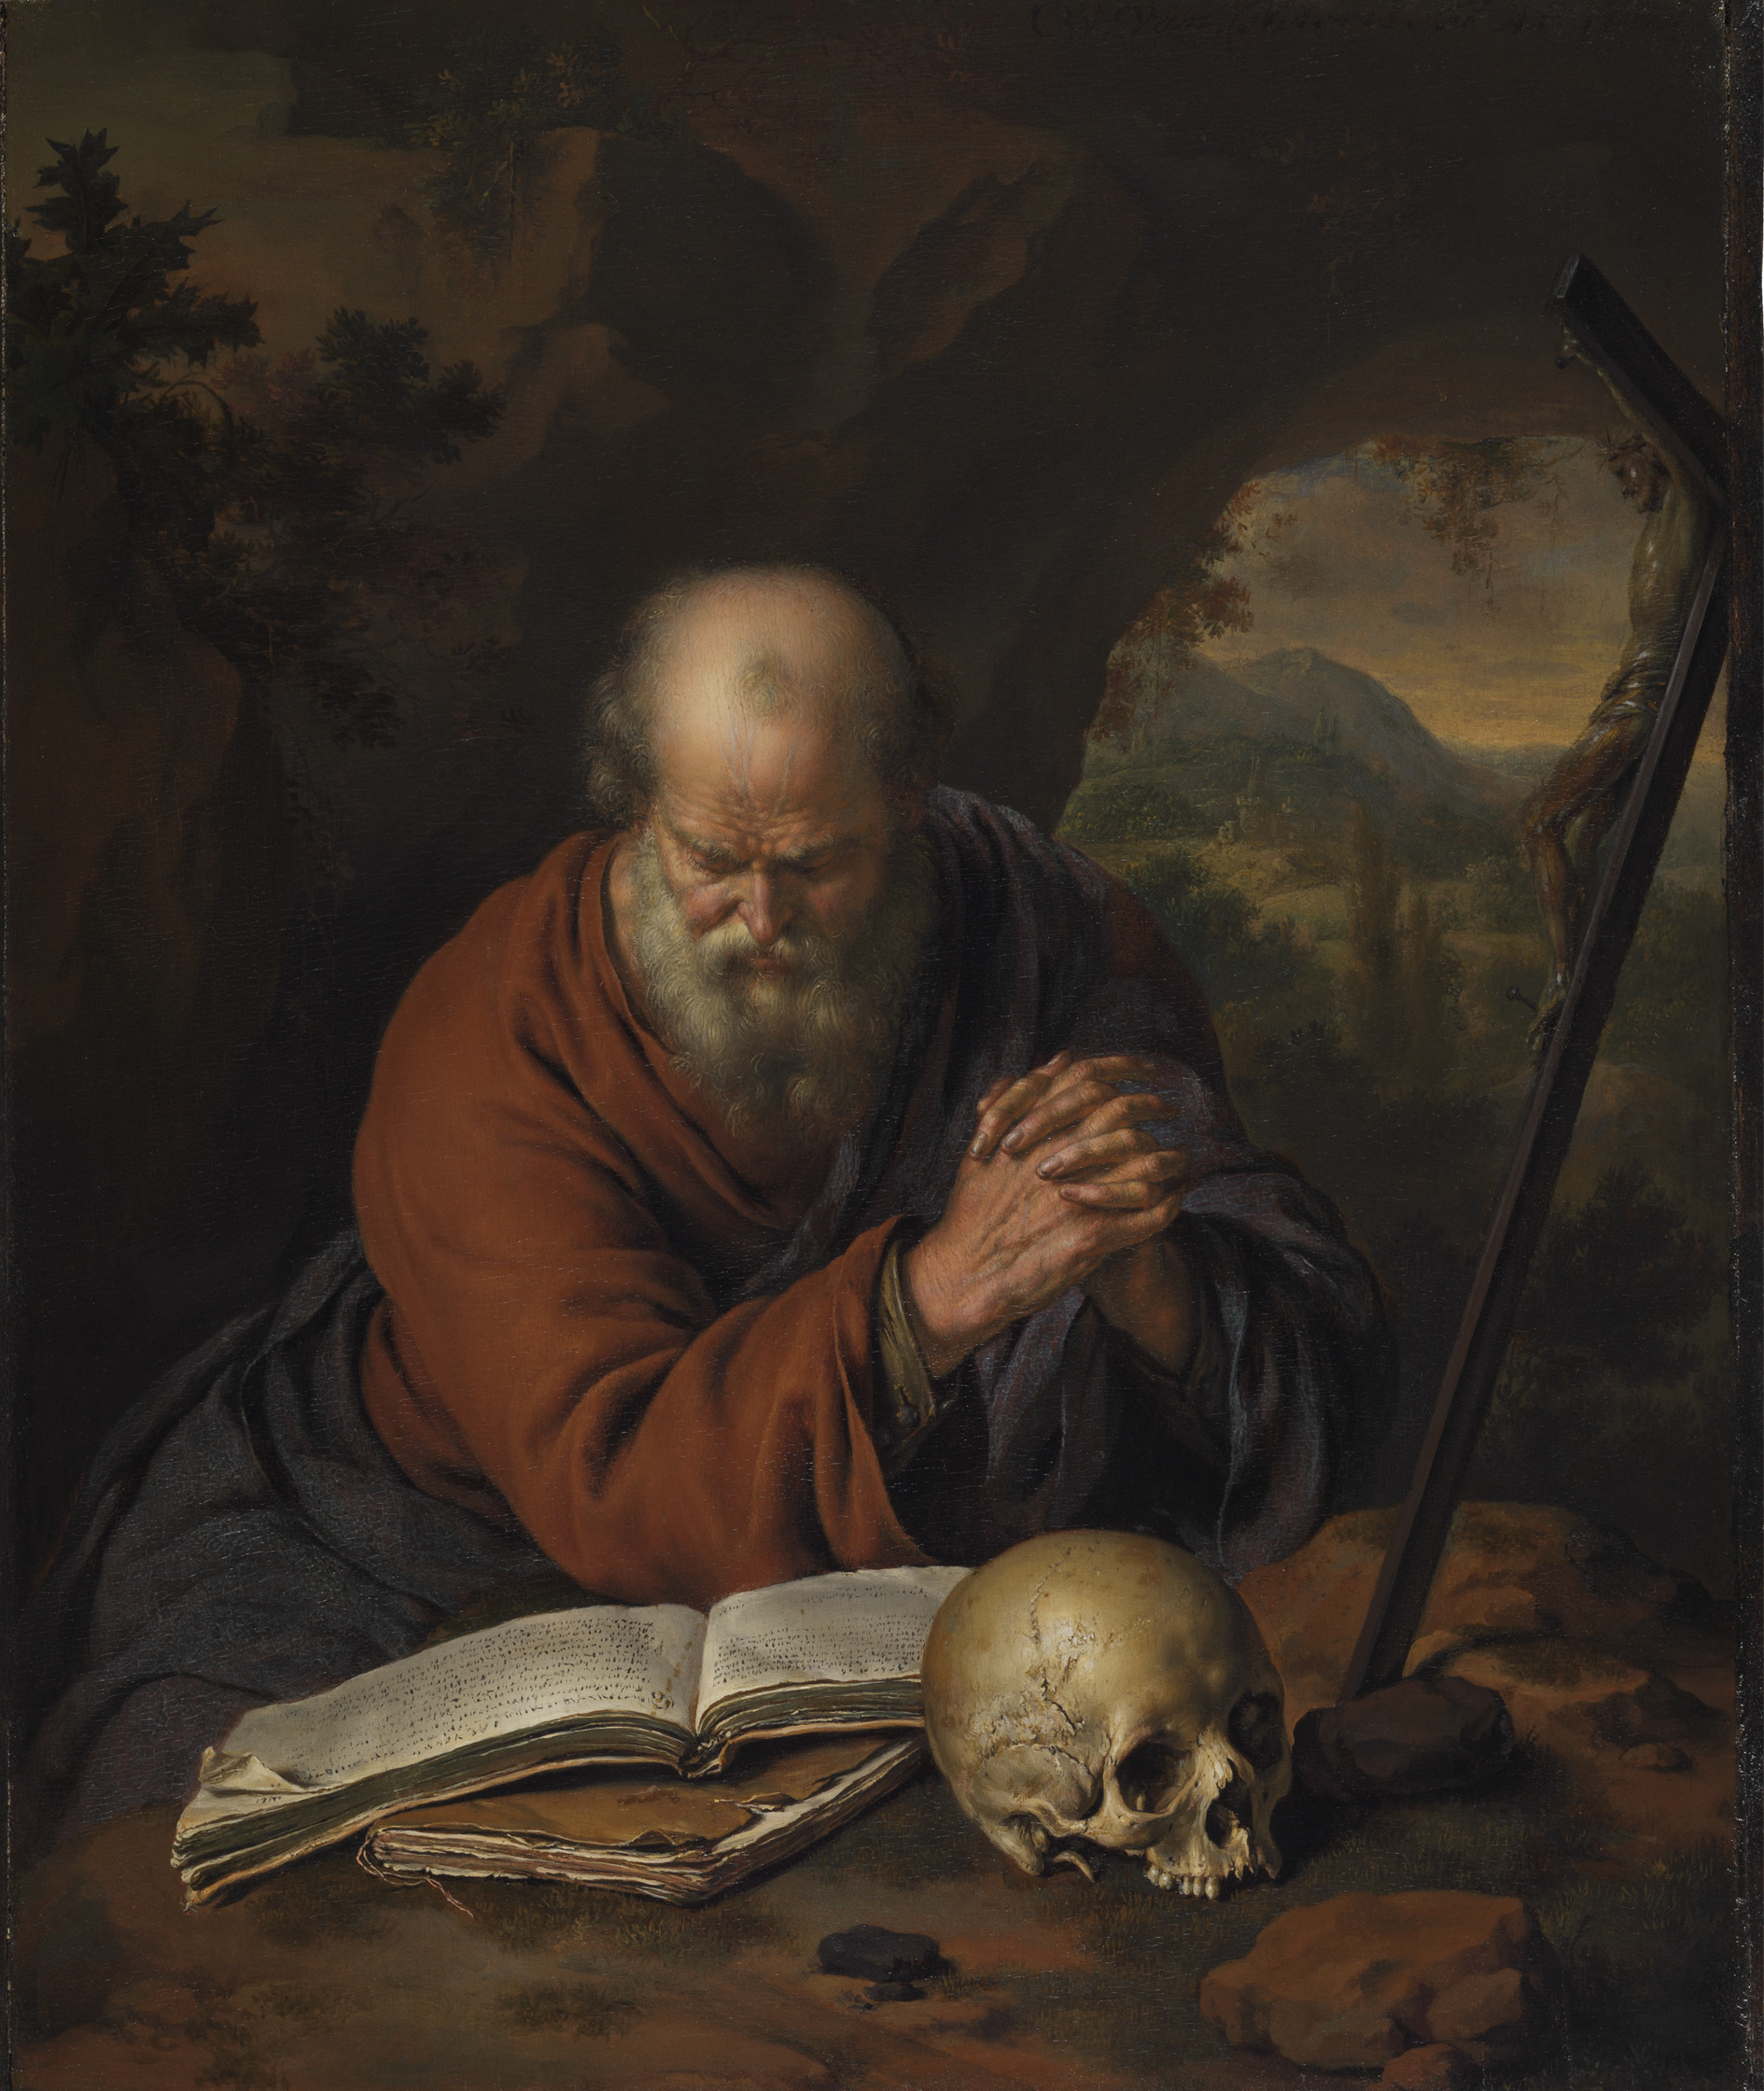 Hermit Praying in the Wilderness - The Leiden Collection